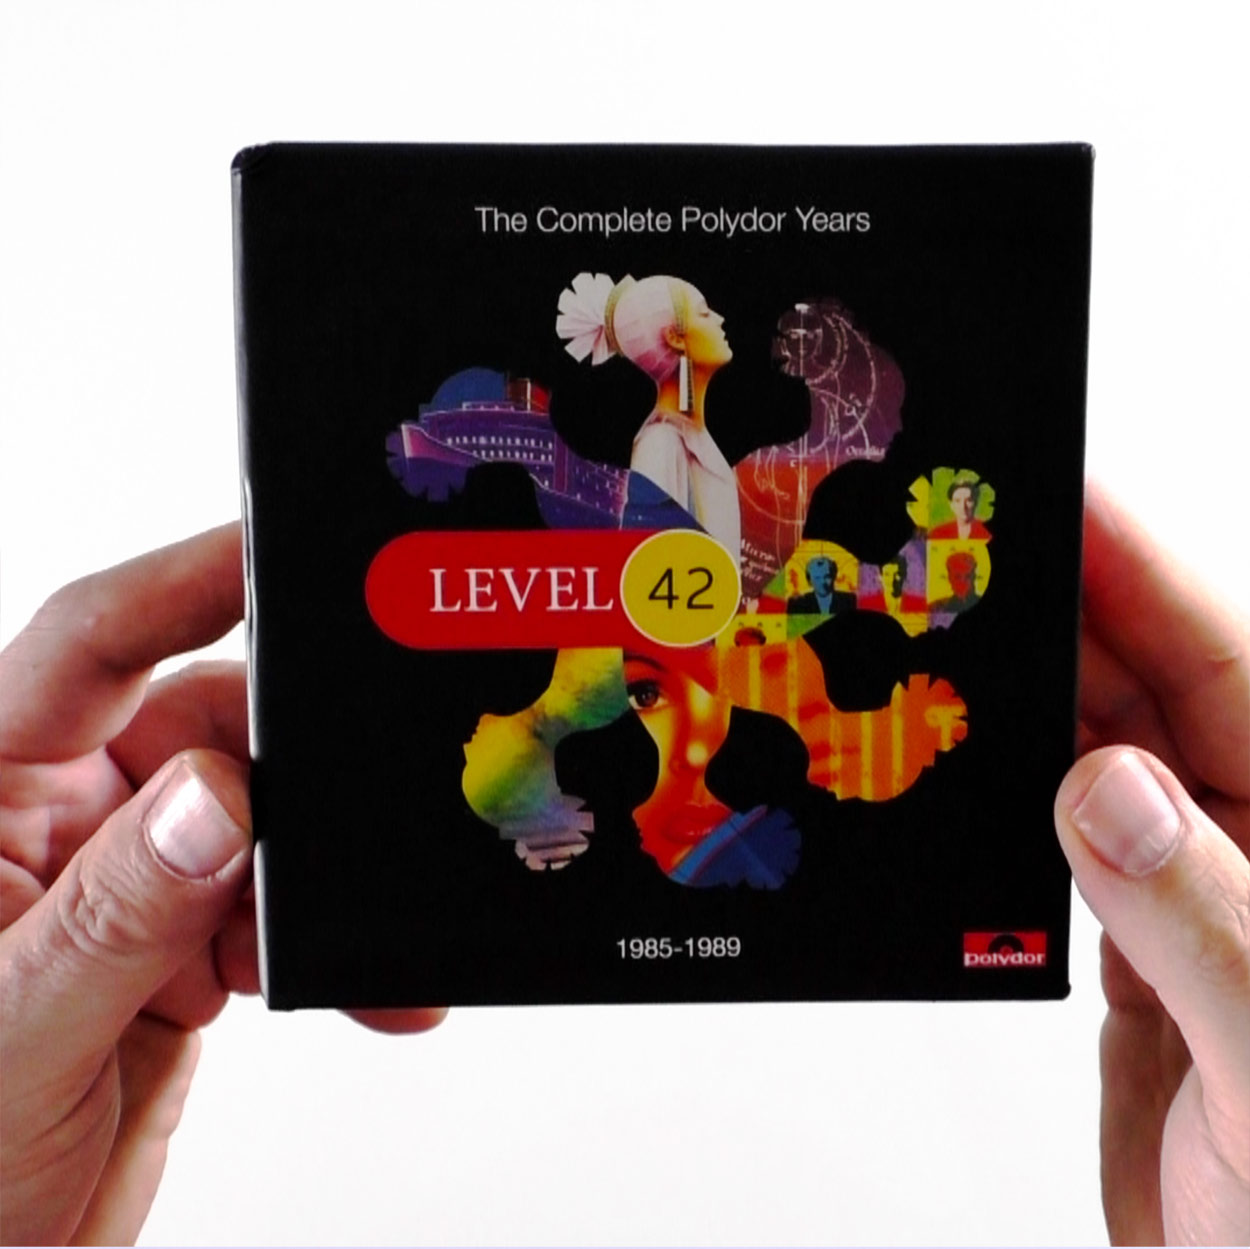 Level 42 / The Complete Polydor Years 1985-1989 unboxing video